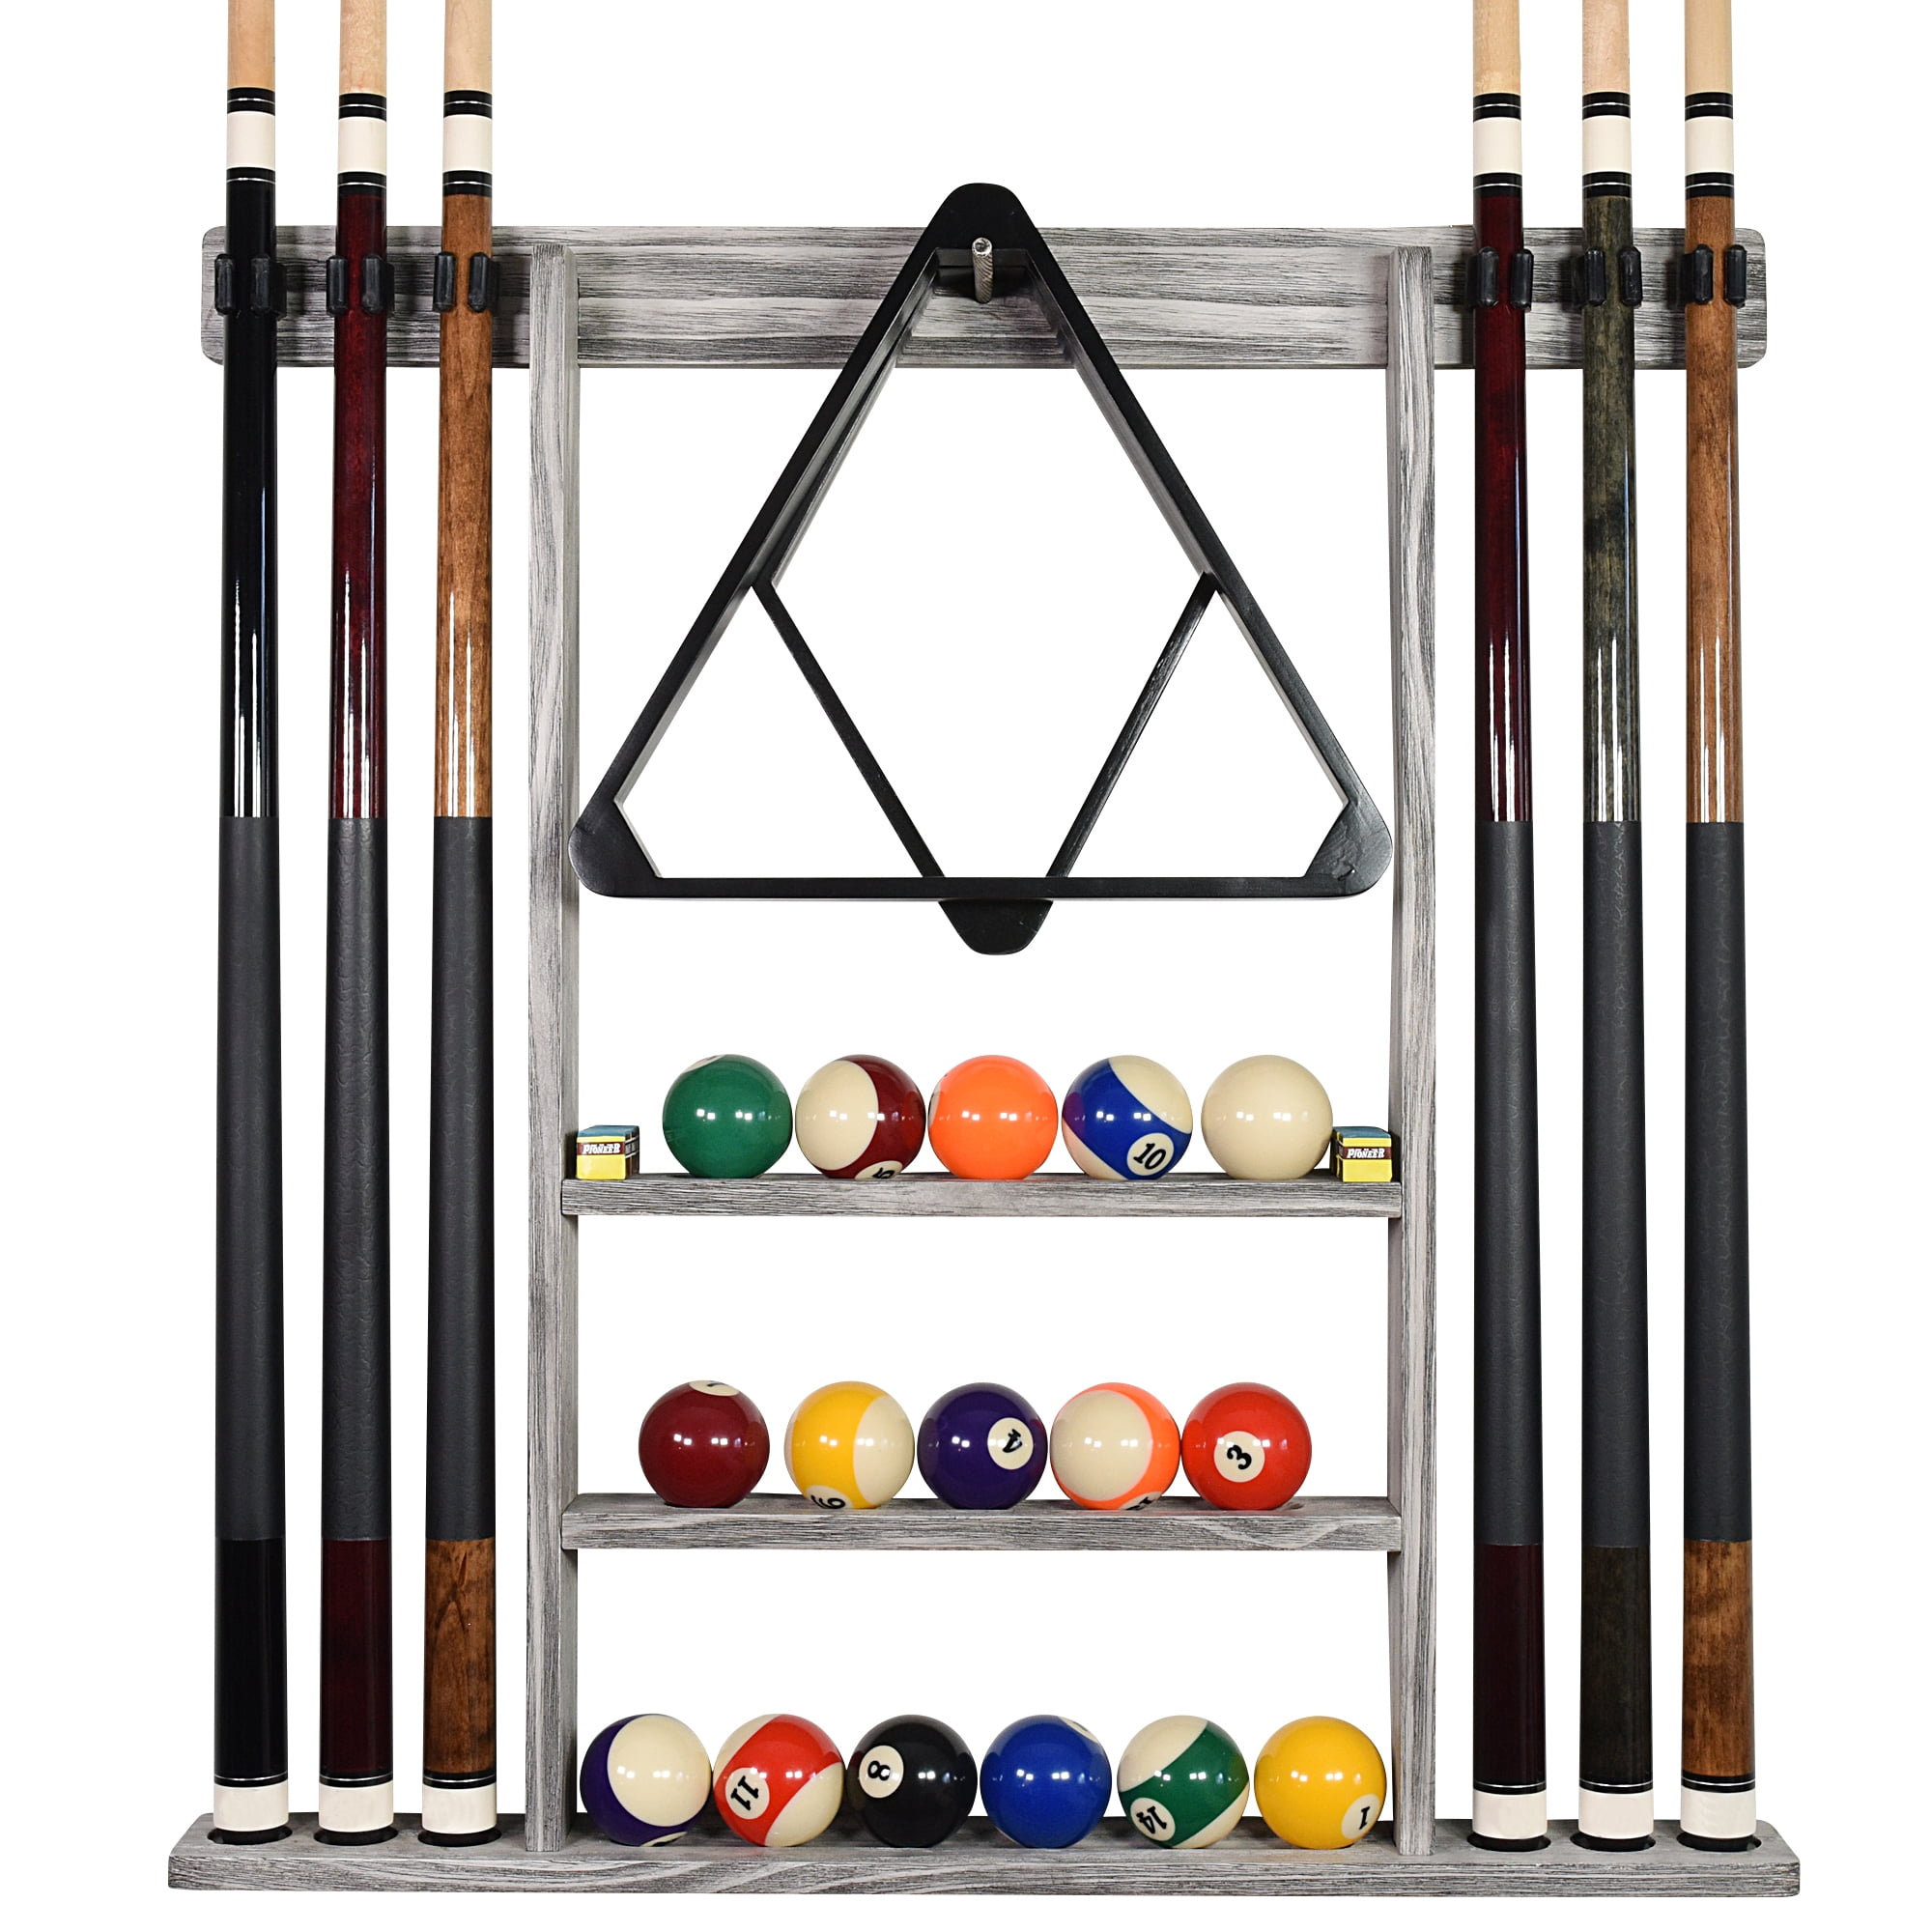 Cue It Up Ultimate Cue Holder Red 4 Clip Pool Billiards FREE Shipping 